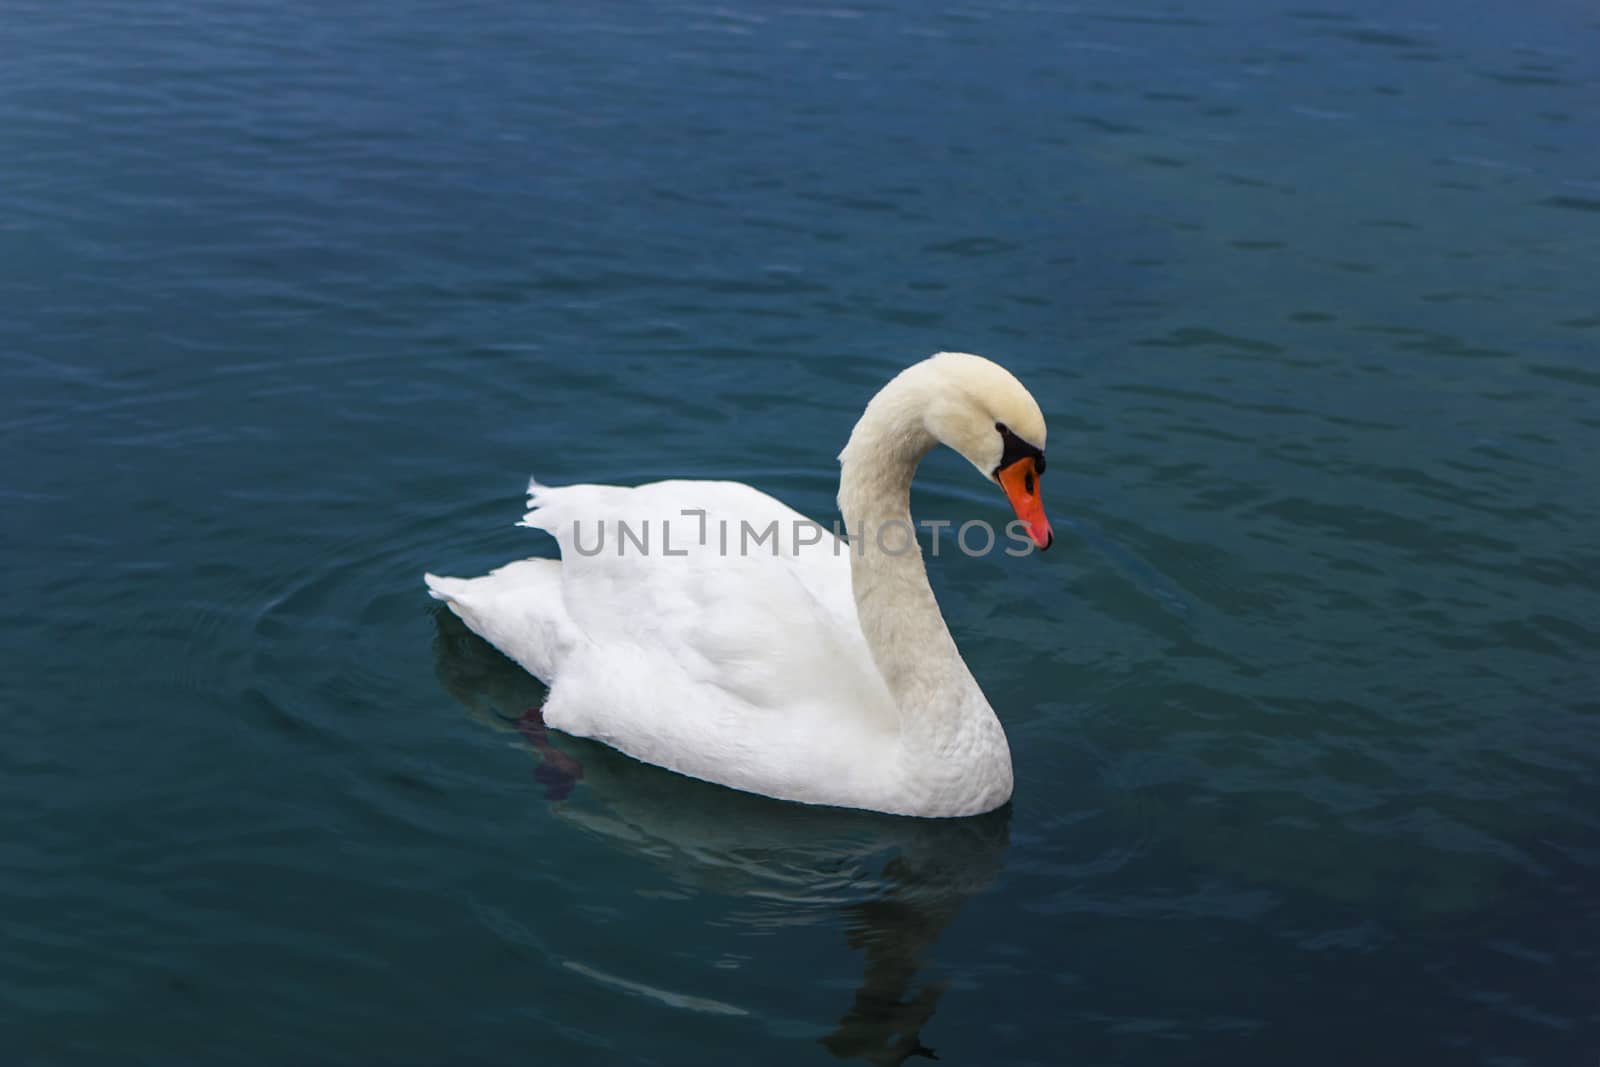 A big mute swan swimming on lake of Como, Italy